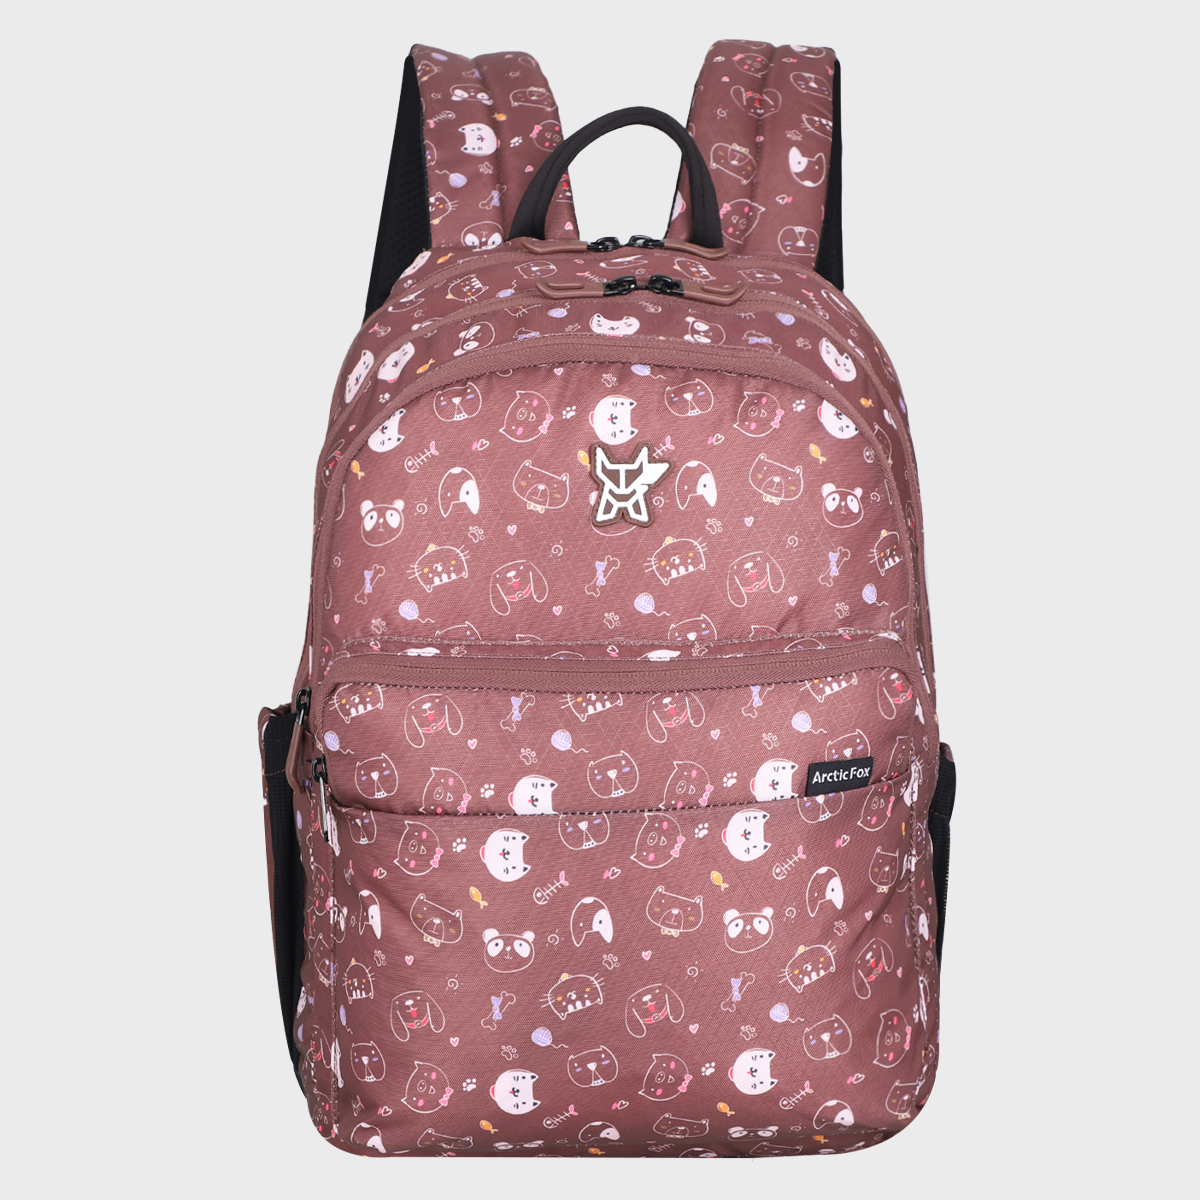 Arctic Fox Kitty Mink School Backpack for Boys and Girls